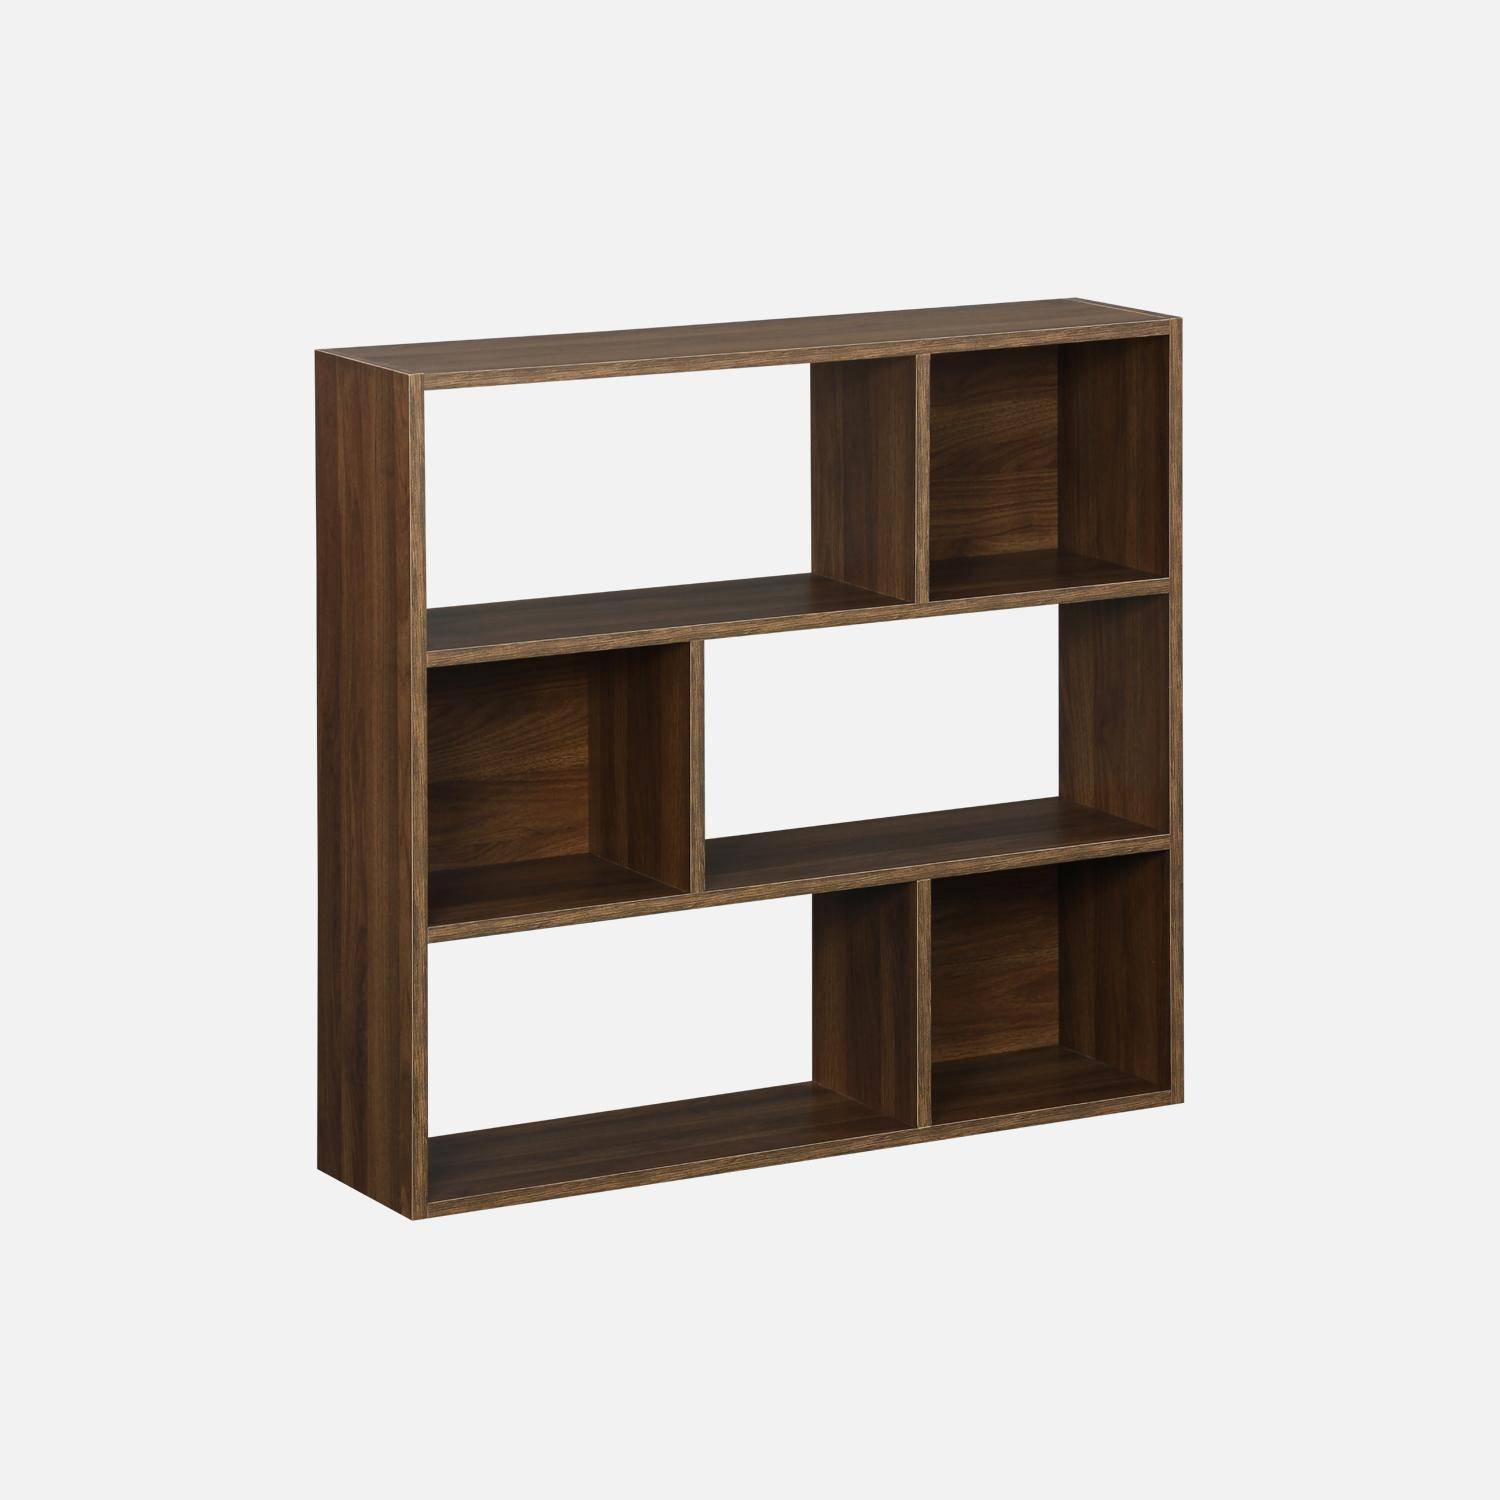 3-shelf bookcase with 6 compartments, wood, L83xW23xH80cm, Pieter,sweeek,Photo3